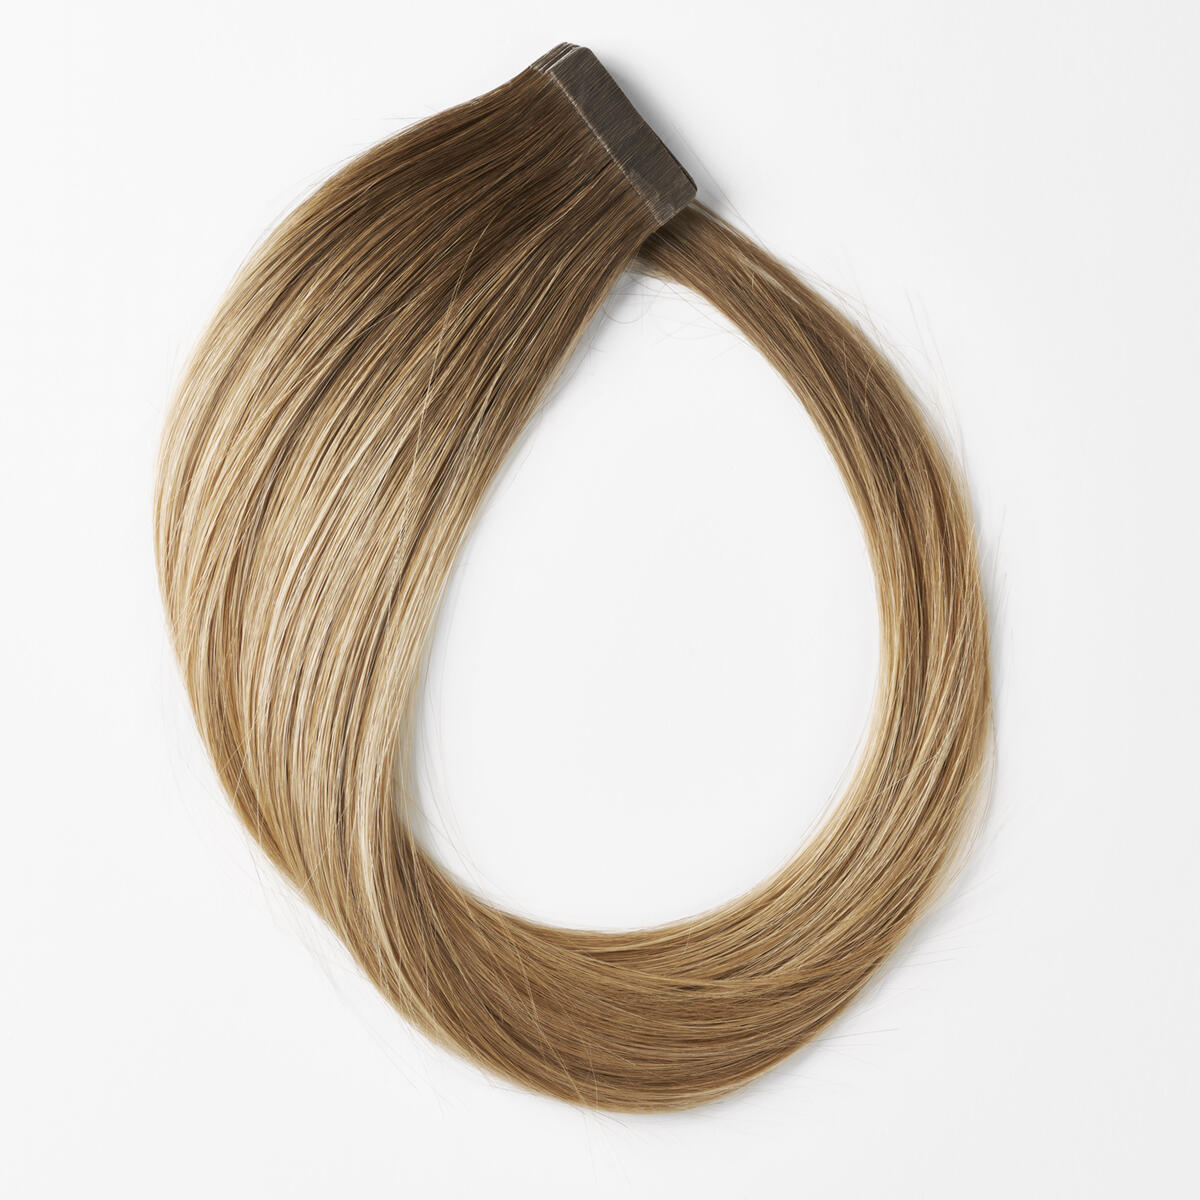 Basic Tape Extensions Classic 4 C2.2/5.1 Natural Brown ColorMelt 50 cm